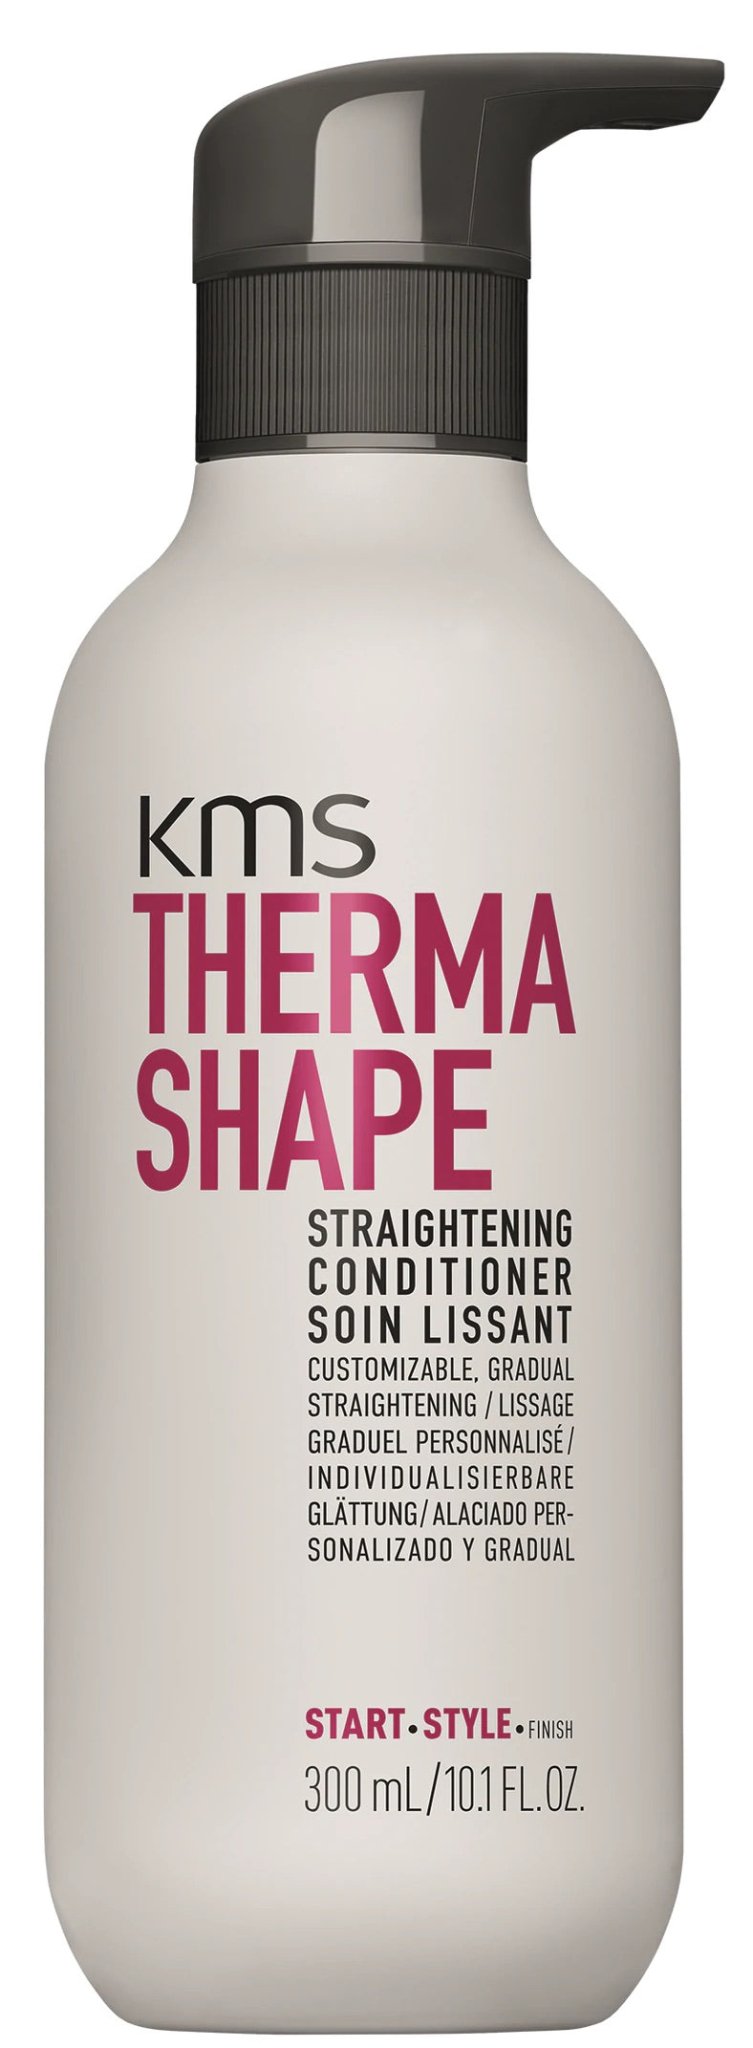 KMS THERMA SHAPE STRAIGHTENING CONDITIONER - She Styles ~Your Image~Shampoo & Conditioner